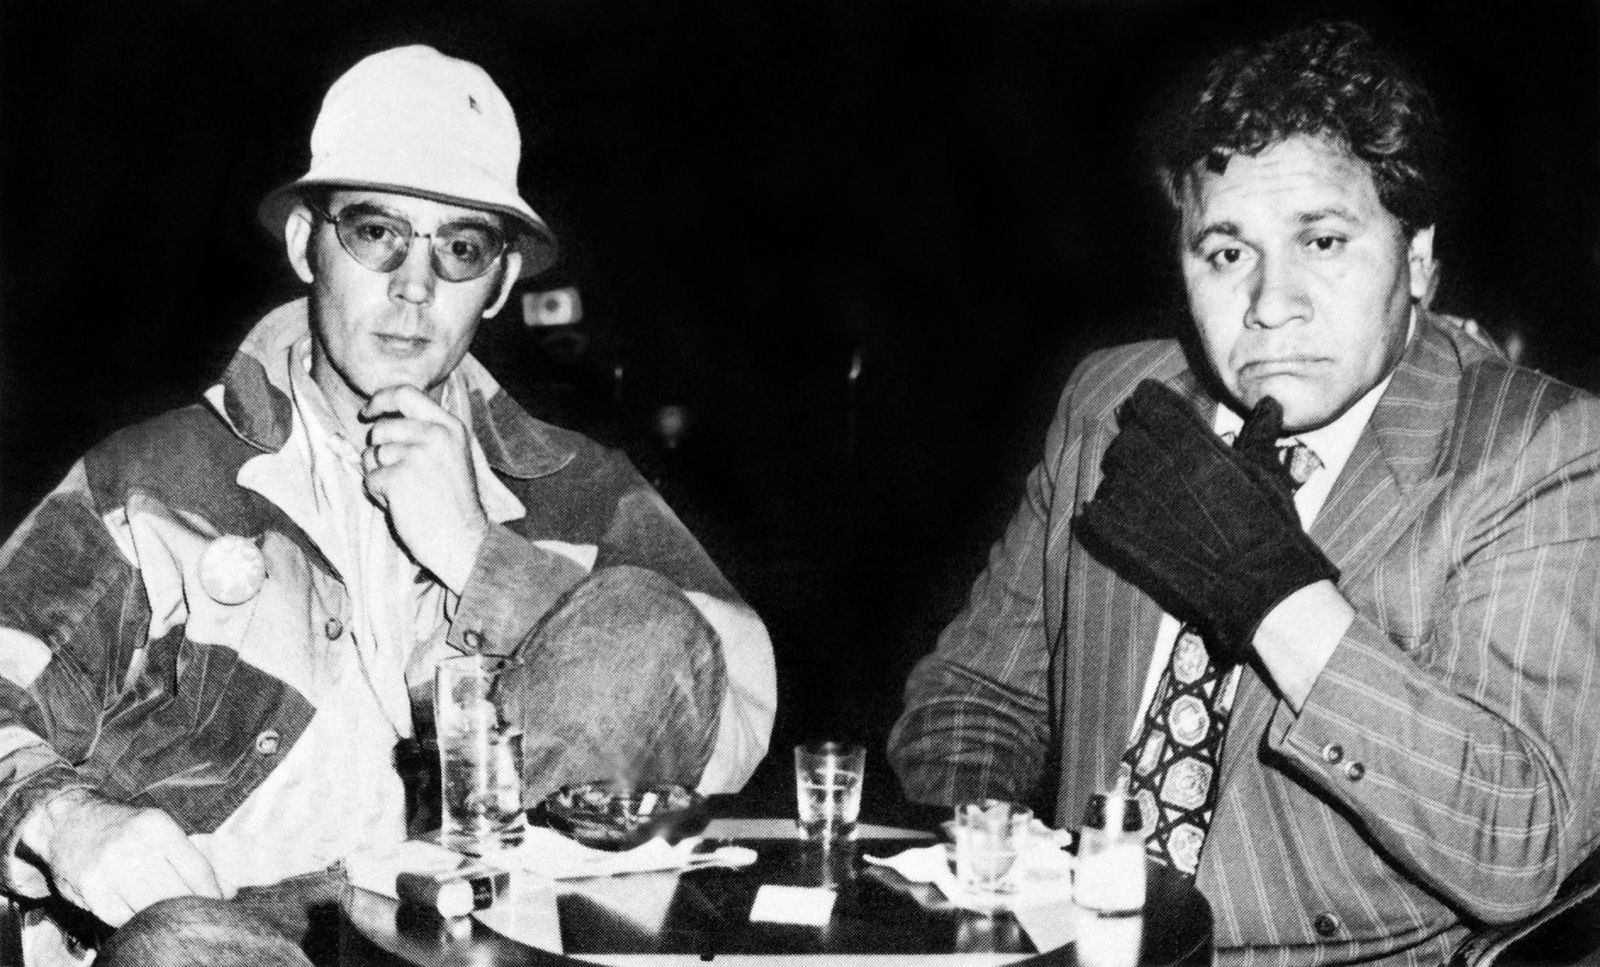 Hunter S. Thompson and Oscar Zeta Acosta: Hunter S. Thompson and Oscar Zeta Acosta, Las Vegas ca. March-April 1971. “Originally published on the back of the dust jacket for the 1972 first edition of Thompson&#39;s novel Fear and Loathing in Las Vegas, published by Random House.”; Hunter S. Thompson; Oscar Zeta Acosta